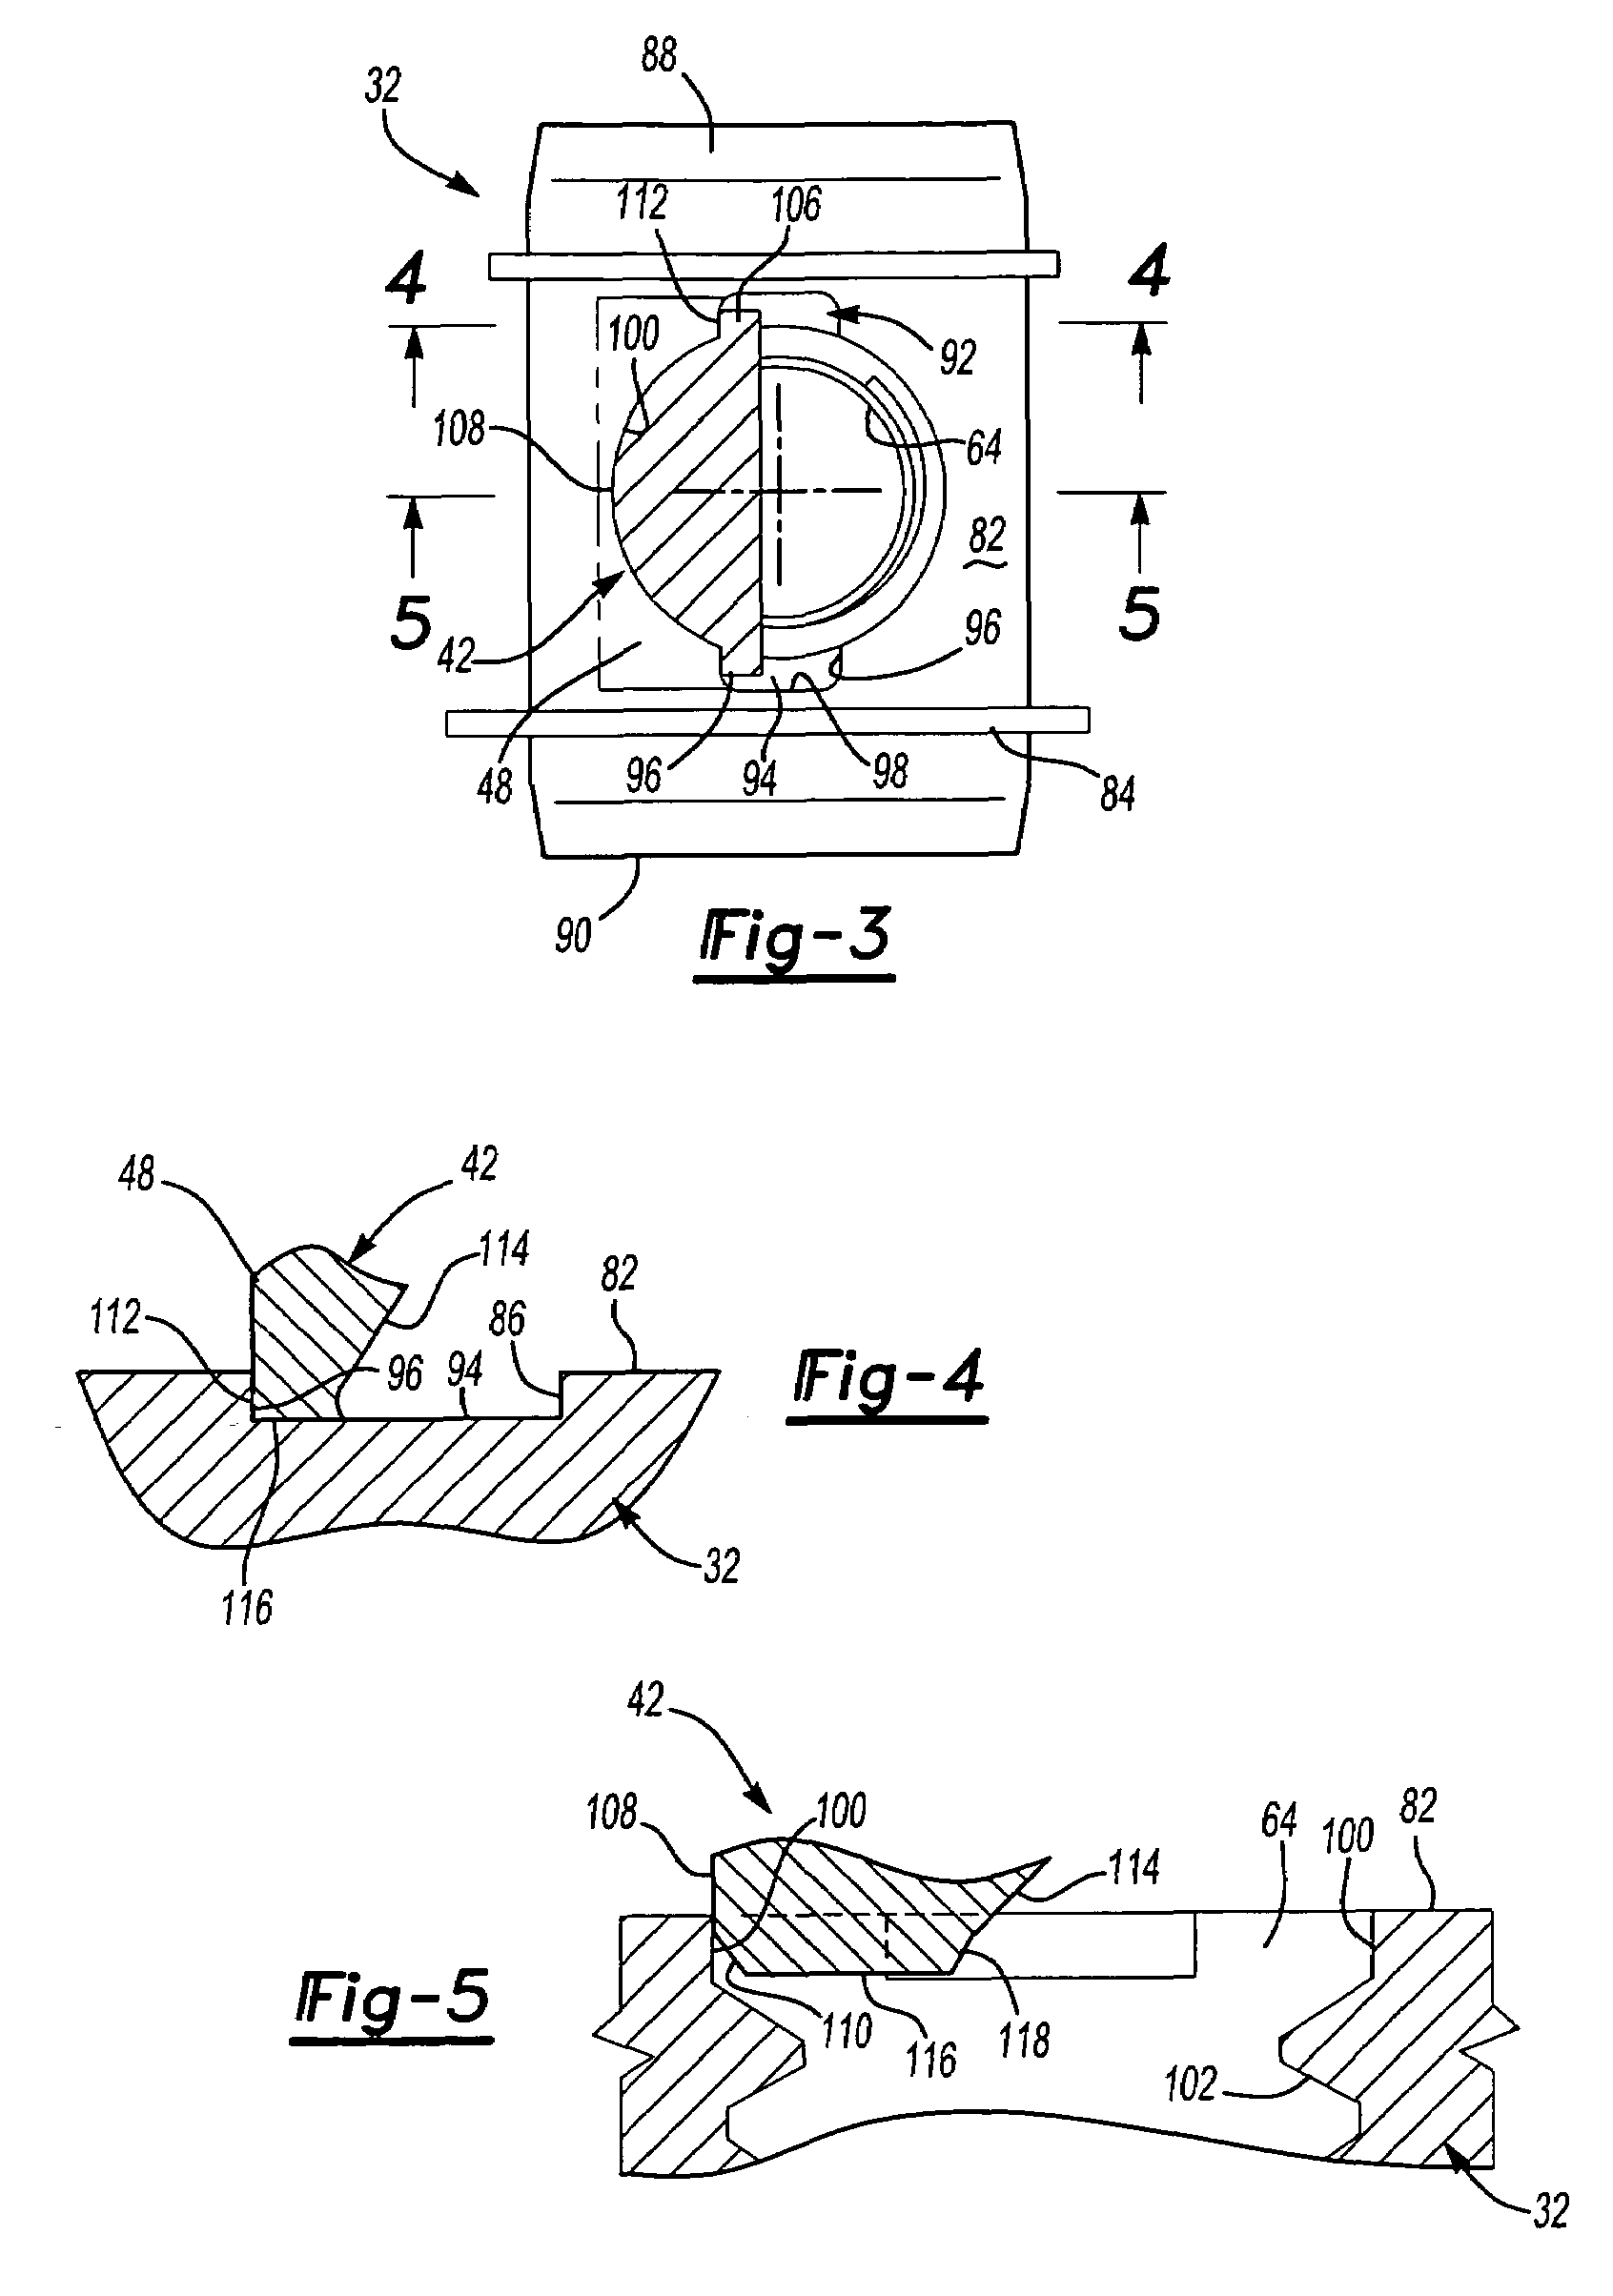 Nut feed system and nut